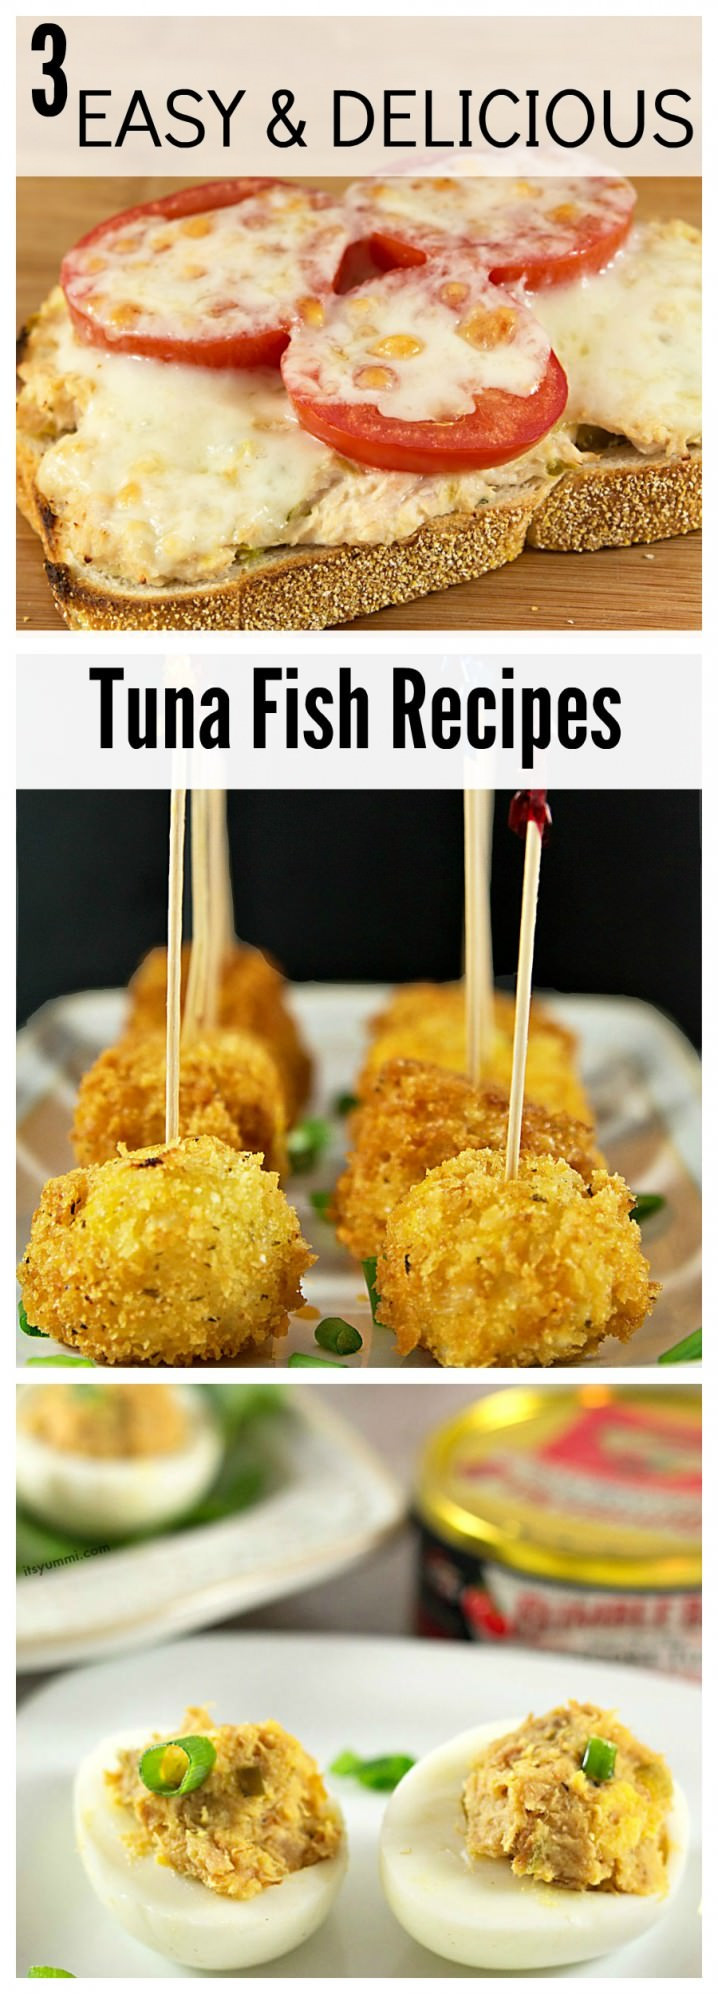 Recipes With Tuna Fish
 Easy Tuna Fish Recipes That Are Anything but Ordinary